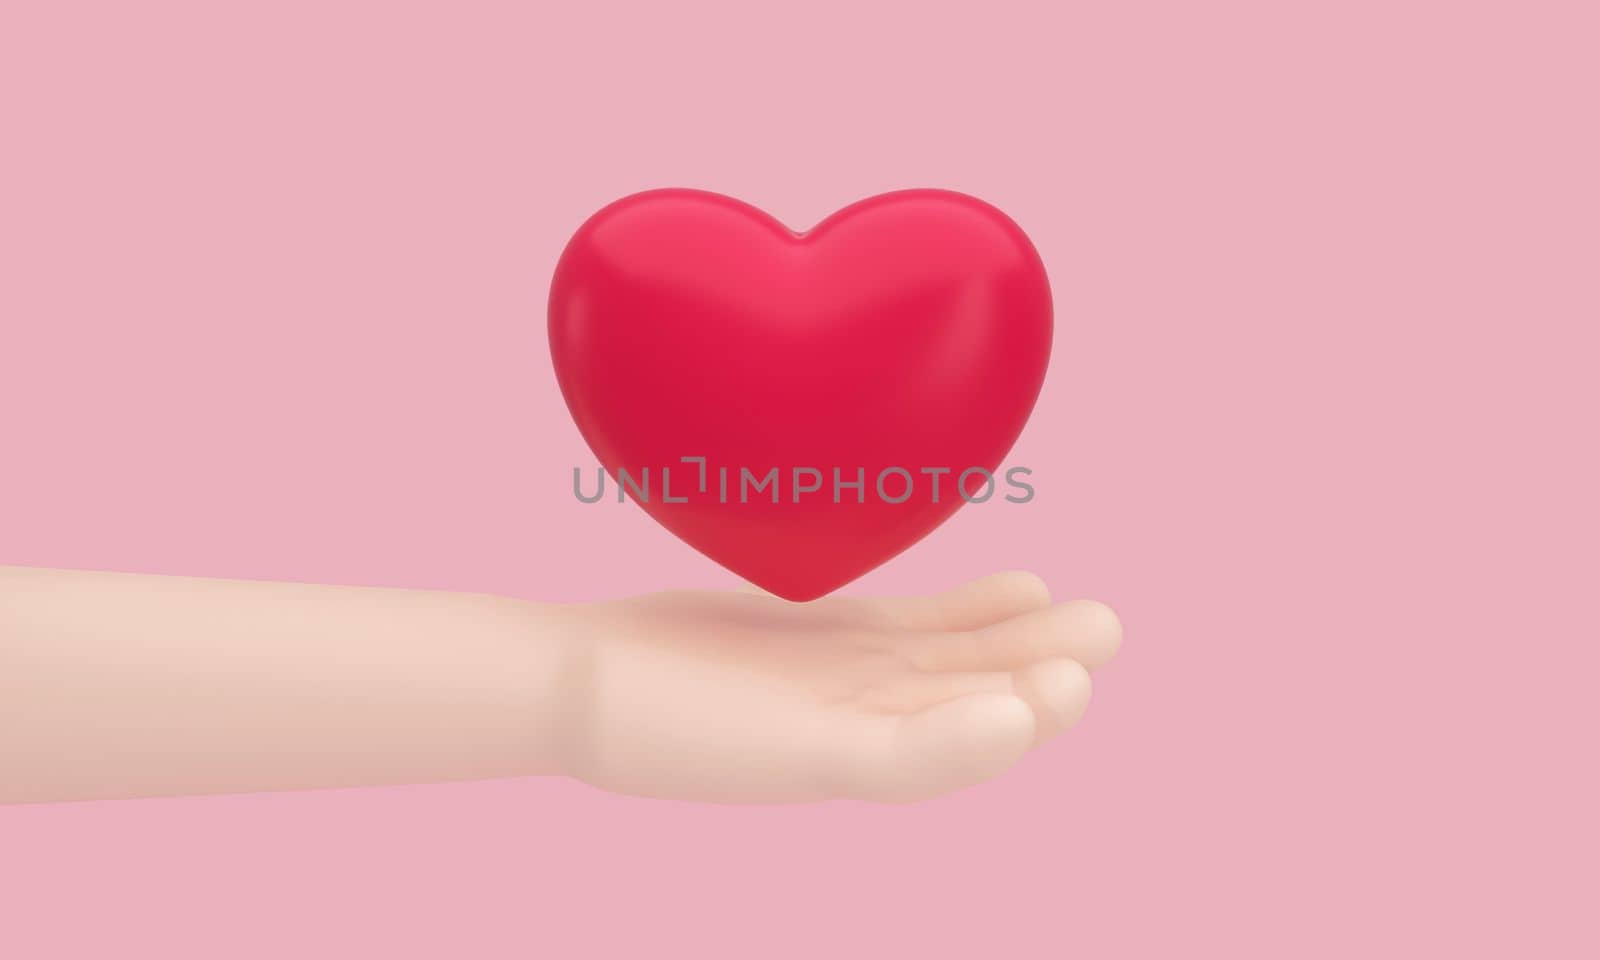 A heart on hand on pink background for Happy Mother's or Valentine's Day greeting card design. 3D Illustration.